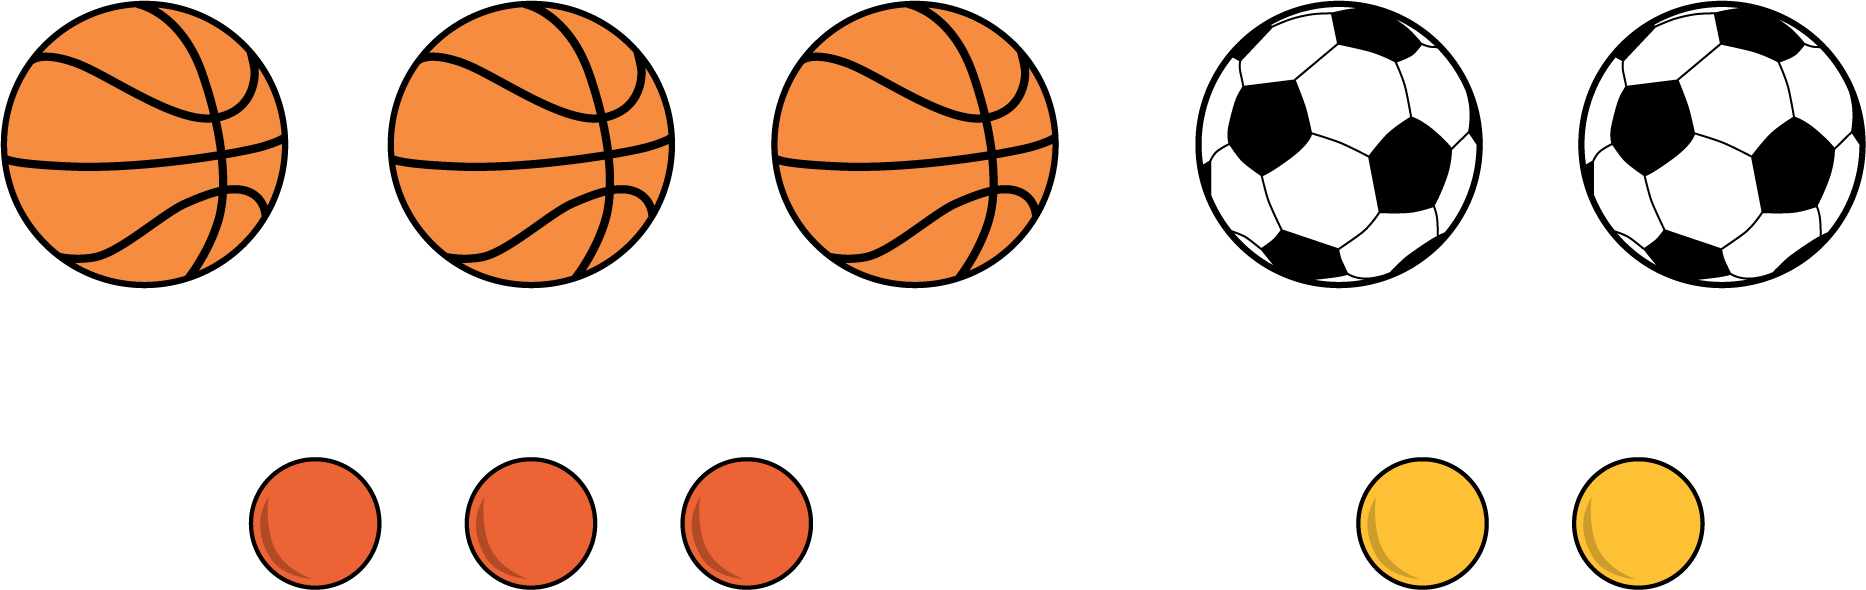 Balls and counters. Basketballs, 3. Soccer balls, 2. Red counters, 3. Yellow counters, 2.